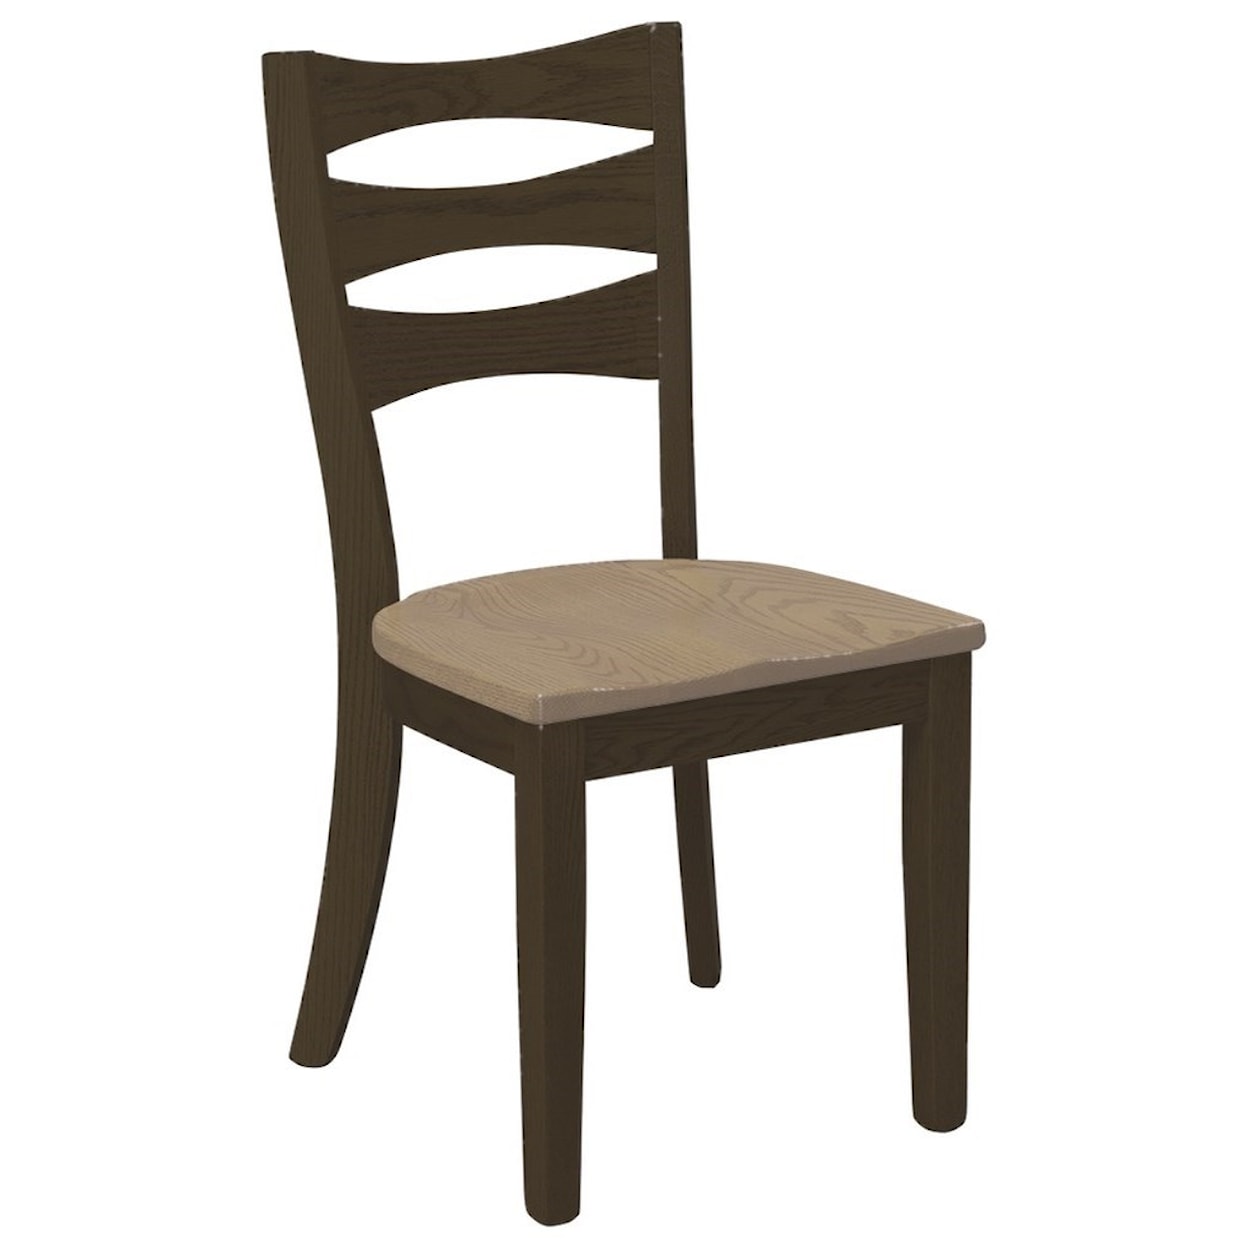 Daniels Amish Chairs and Barstools Sierra Side Chair